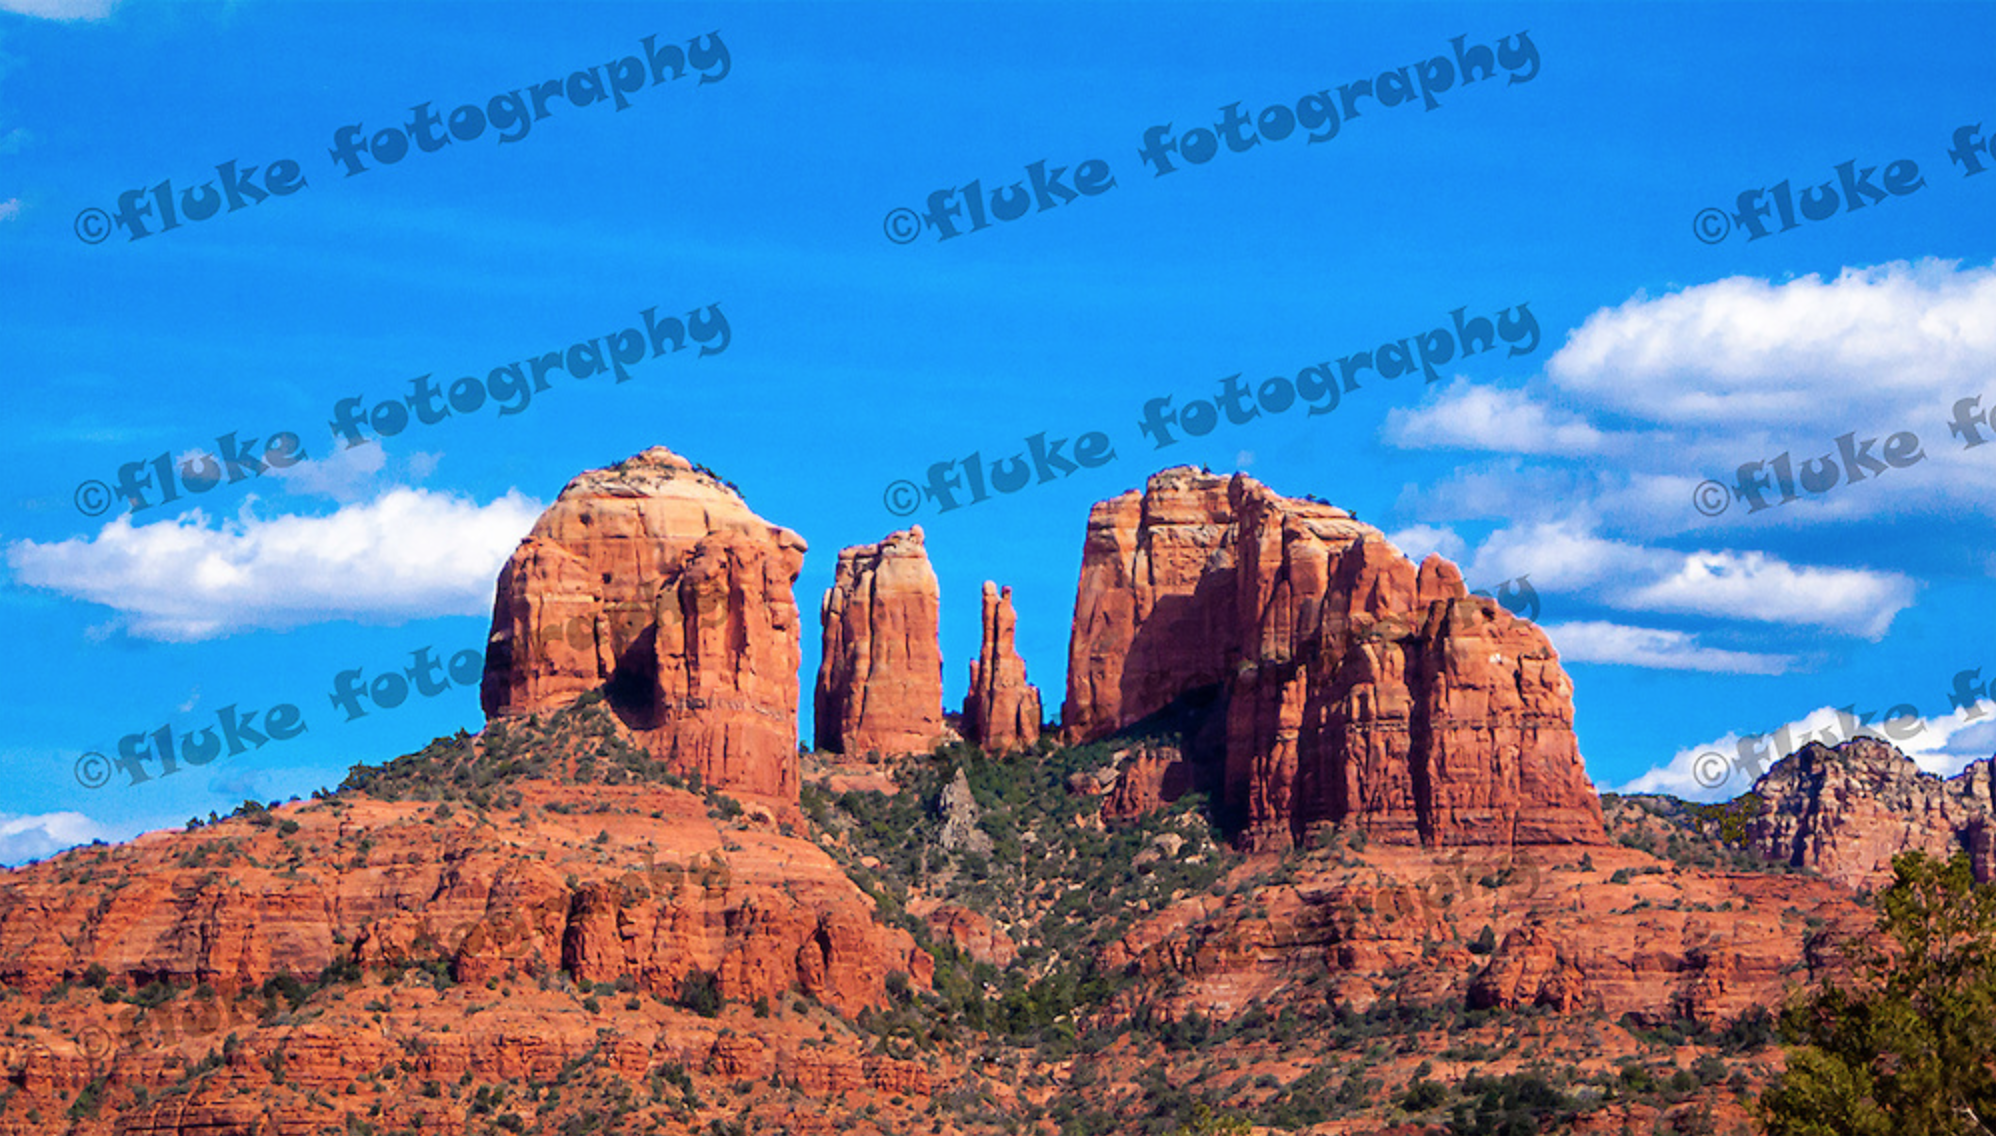 Cathedral Rock, AZ - One of the most beautiful and magical places in the world.